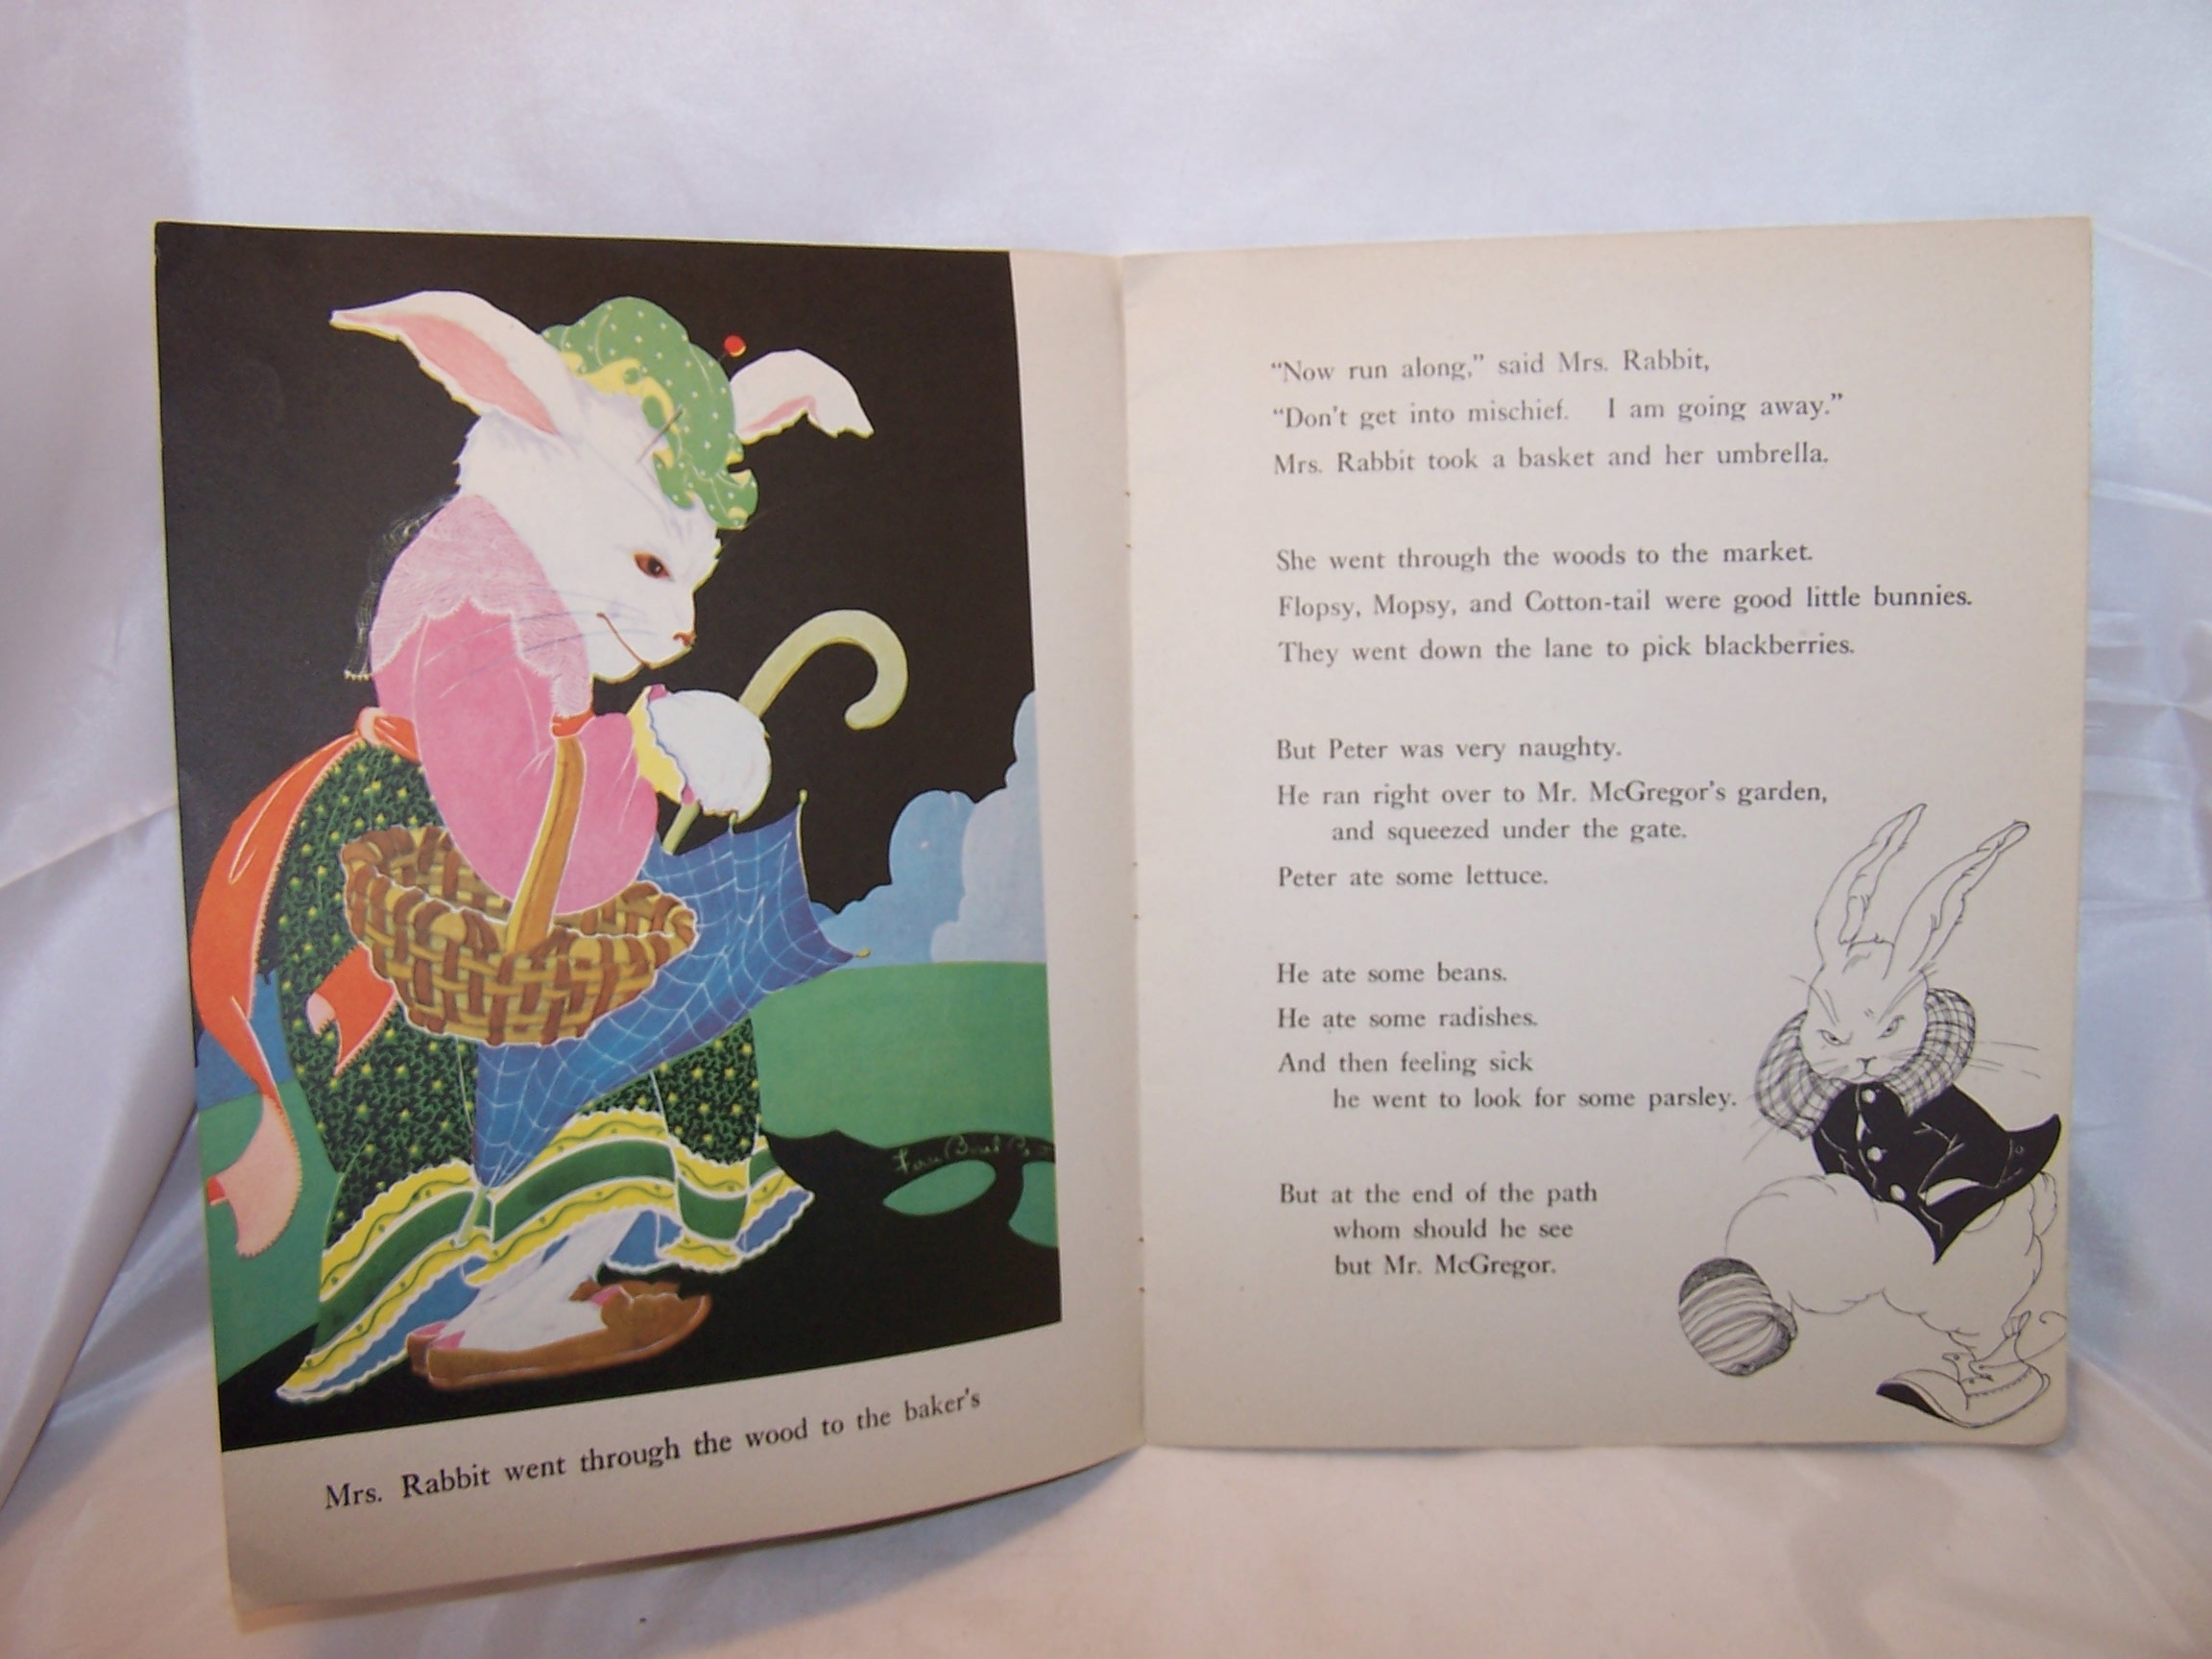 Image 4 of Peter Rabbit Book, Storybook, 1946, Aldredge and McKee, Prang Company Publishers